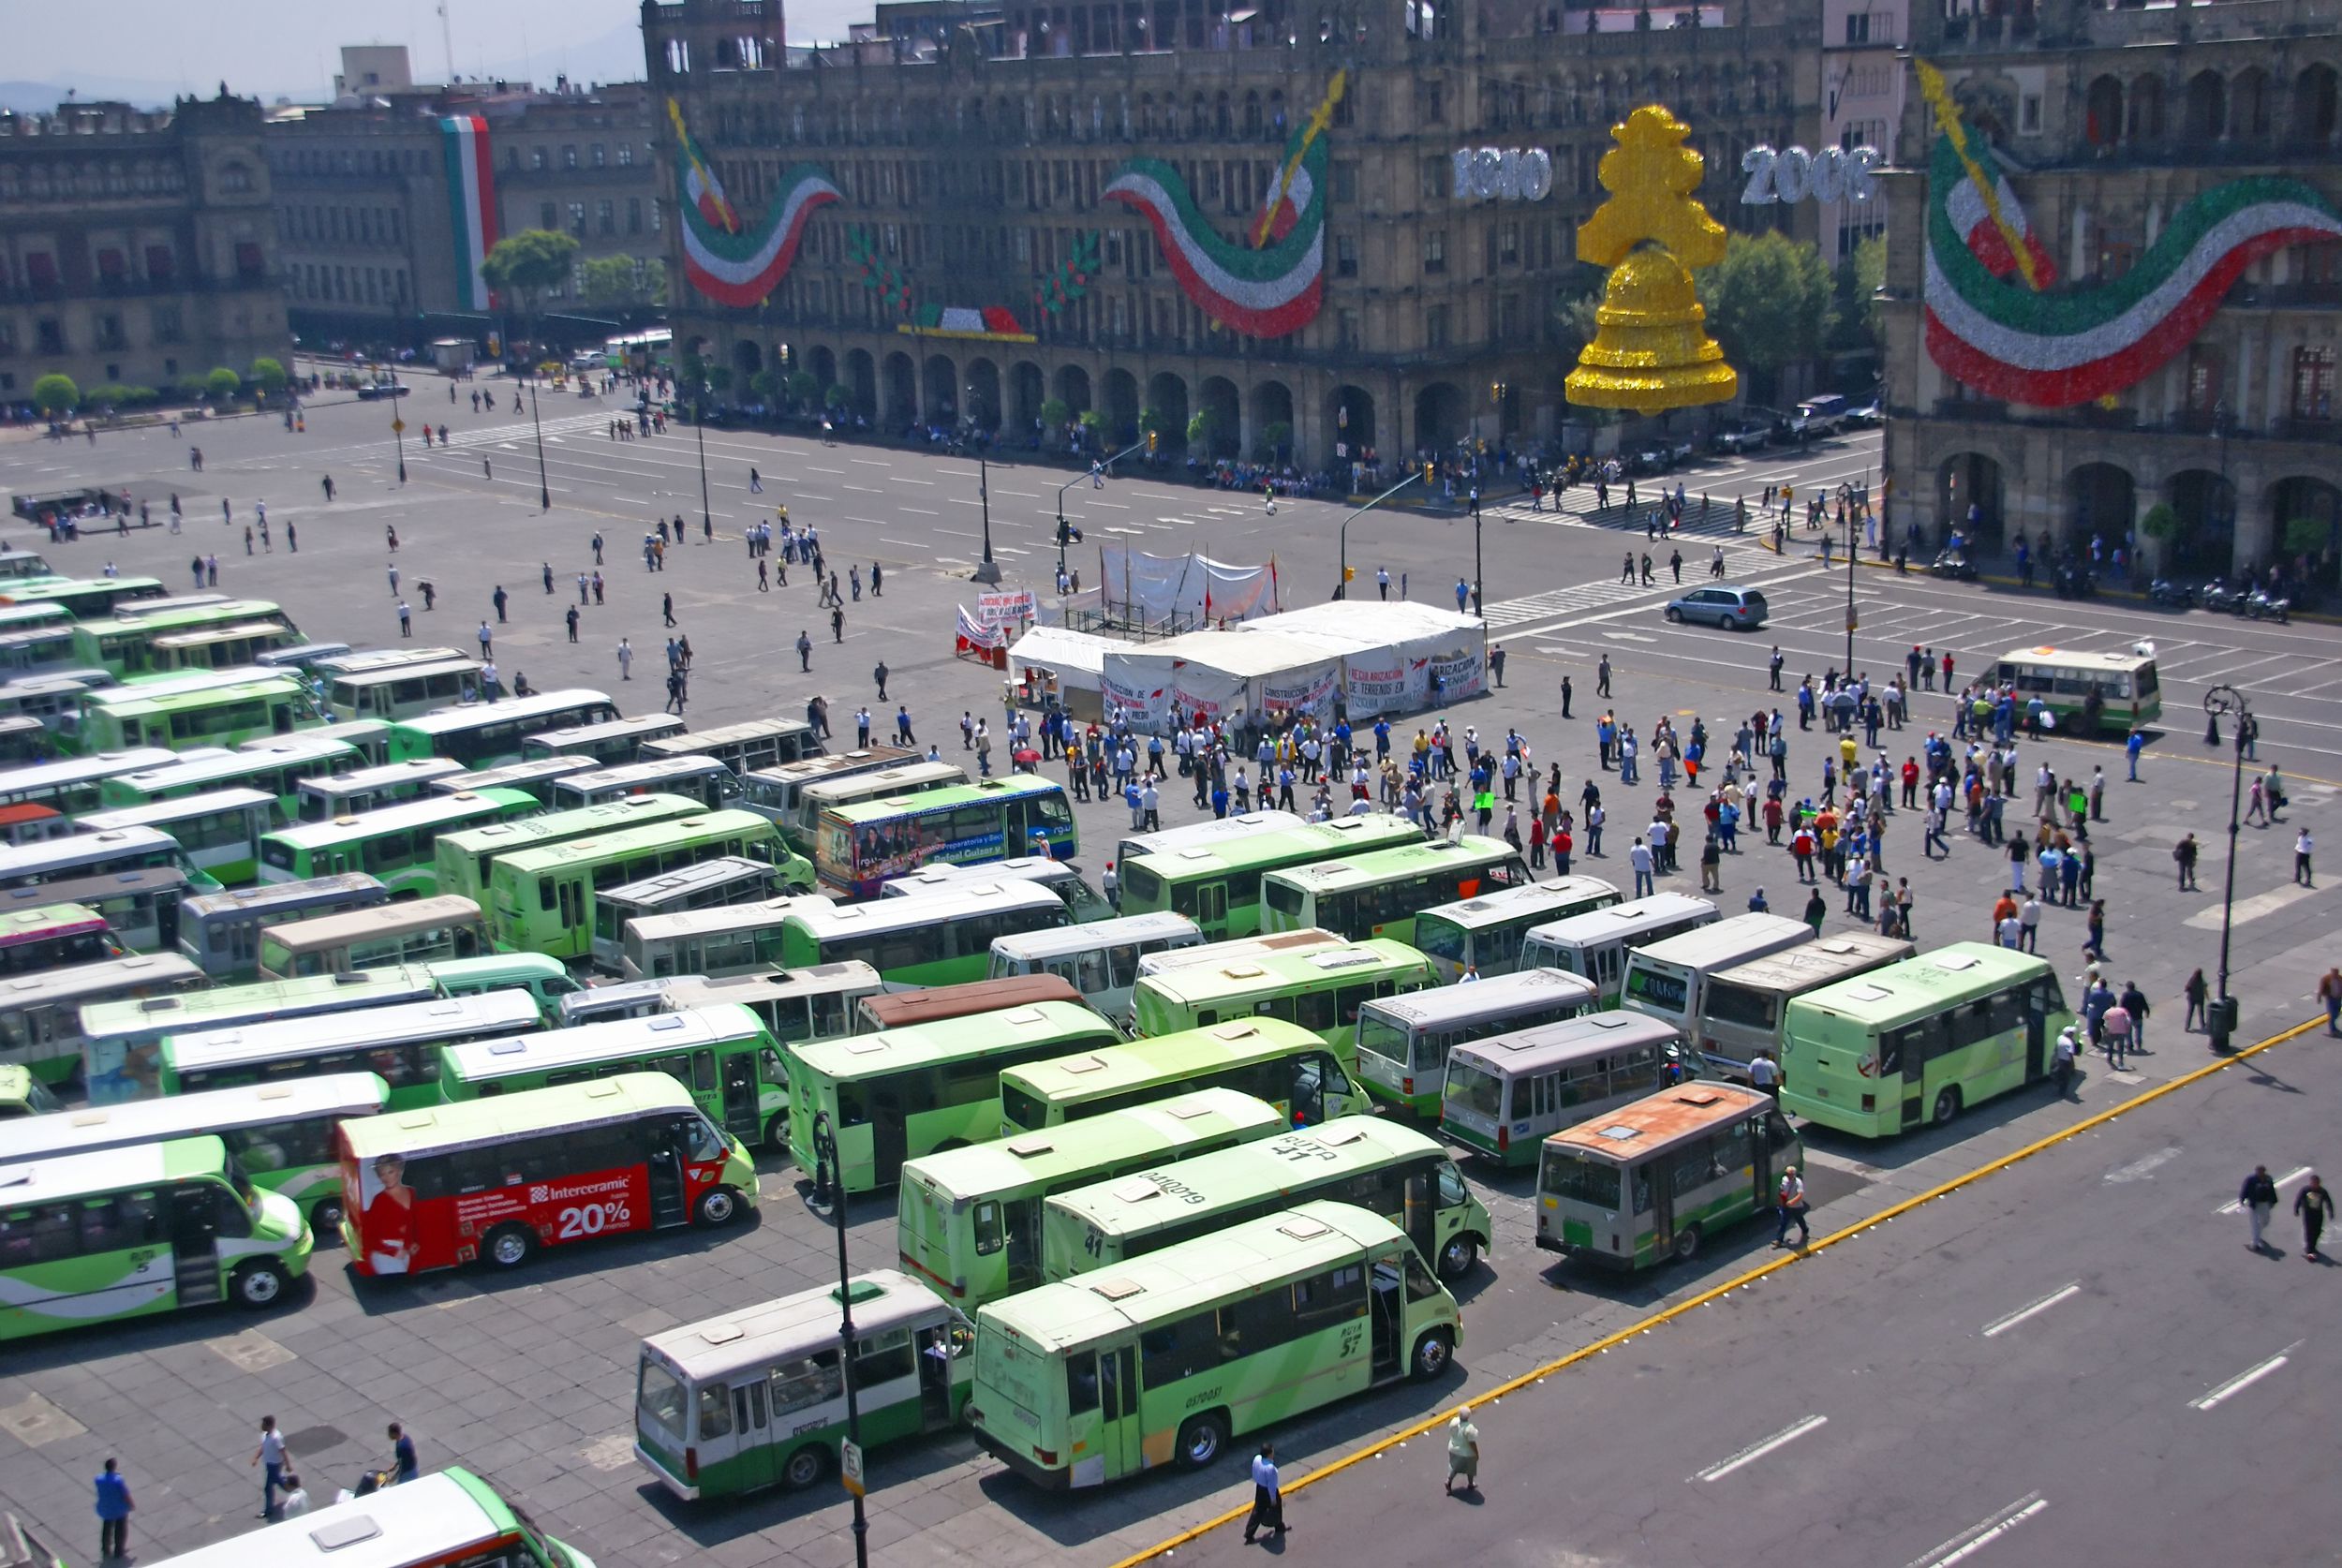 Microbuses in Mexico City